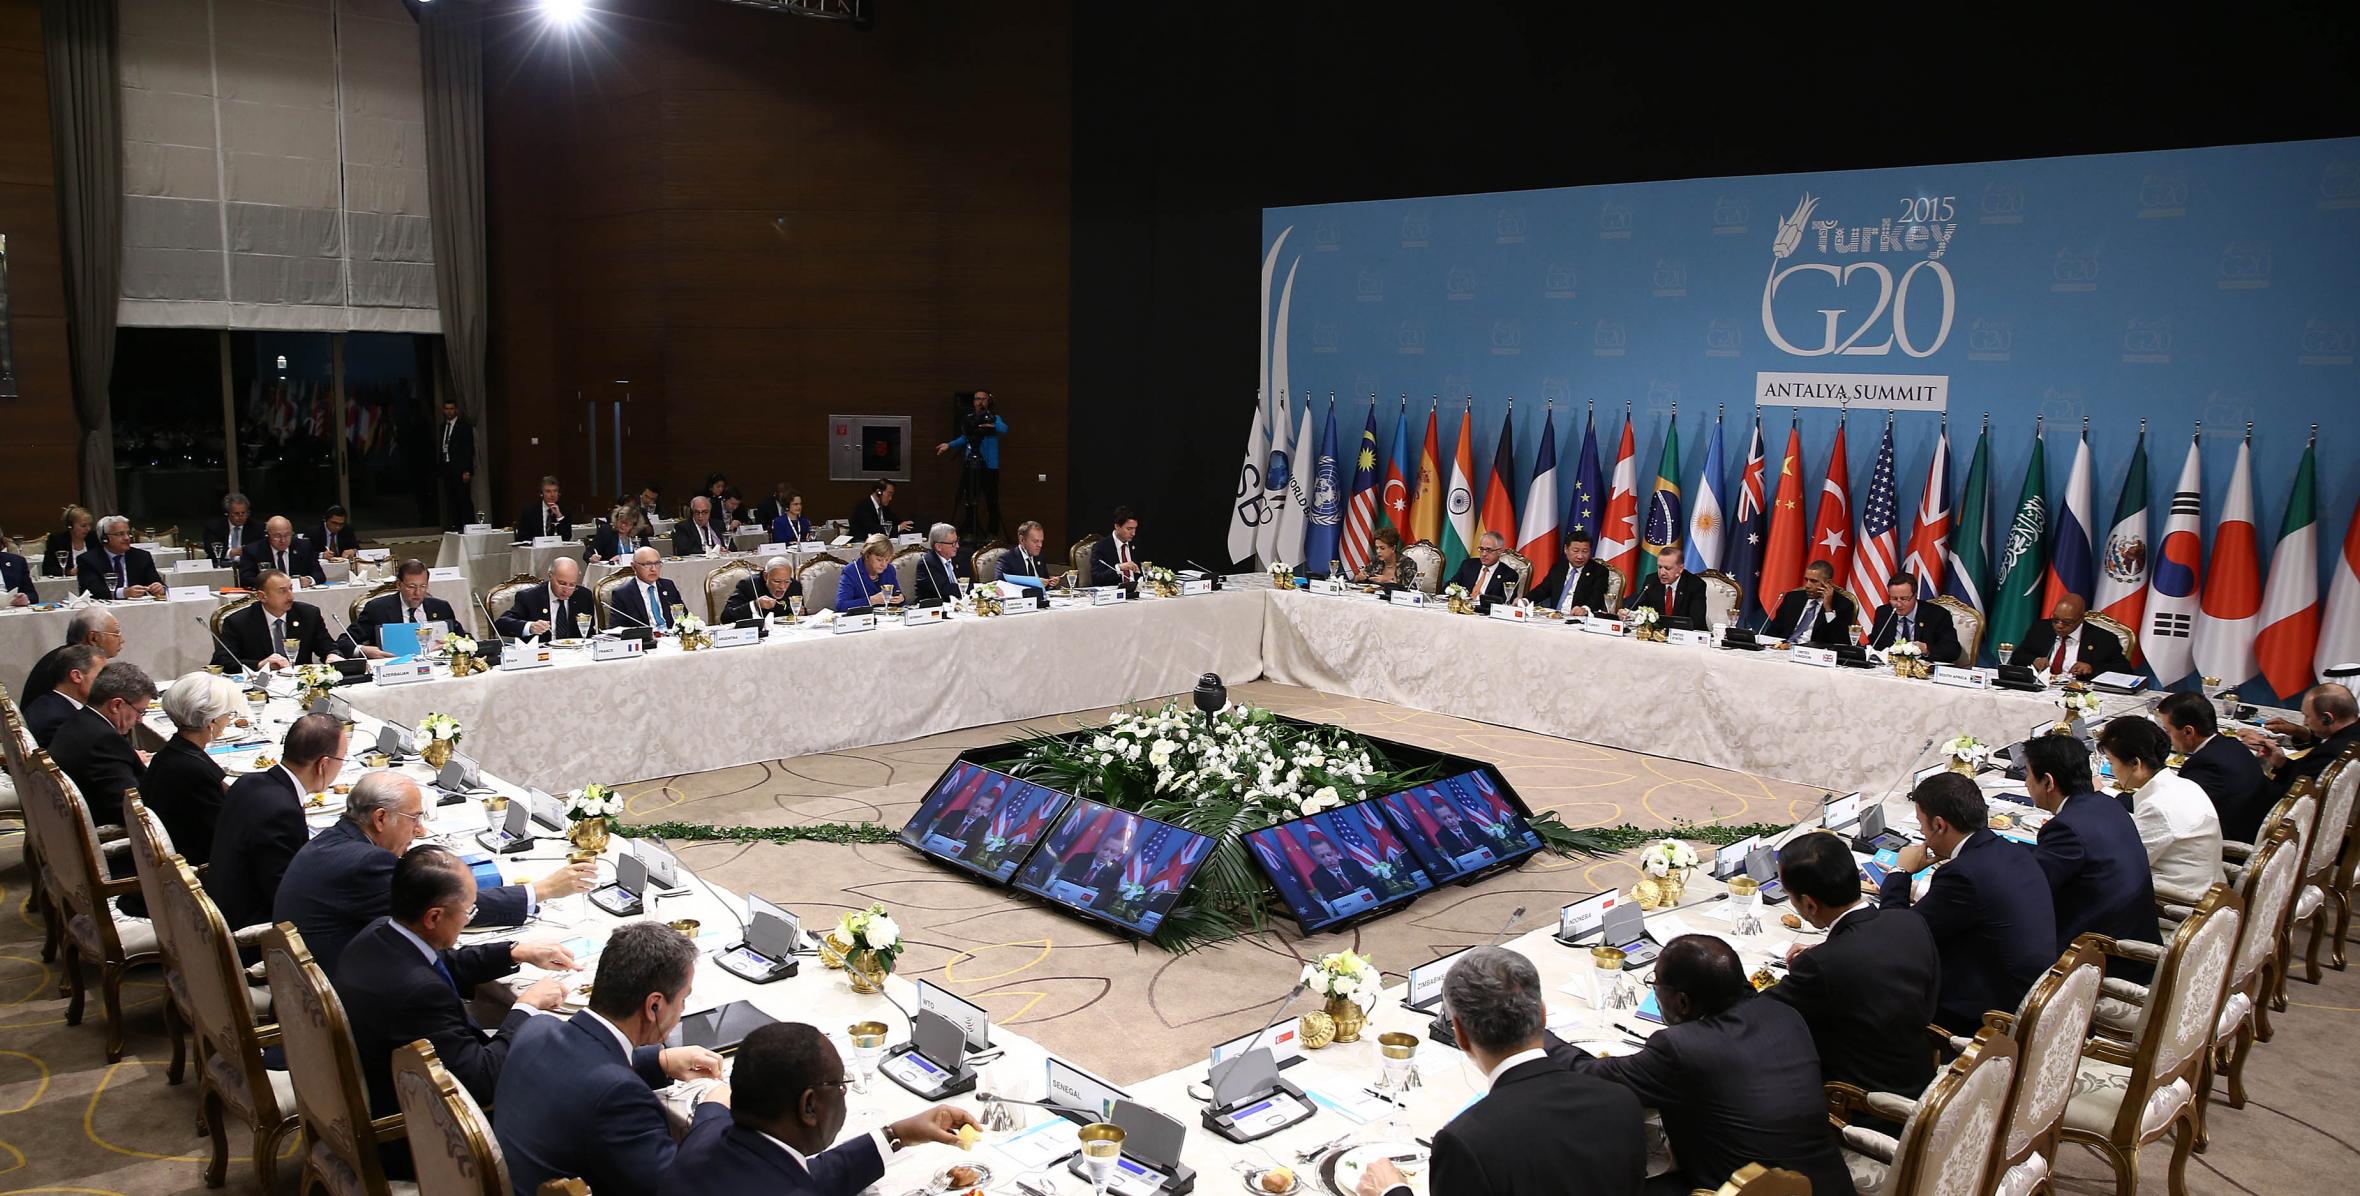 Ilham Aliyev addressed discussions on combat against terrorism and refugee crisis at the G20 Summit in Antalya